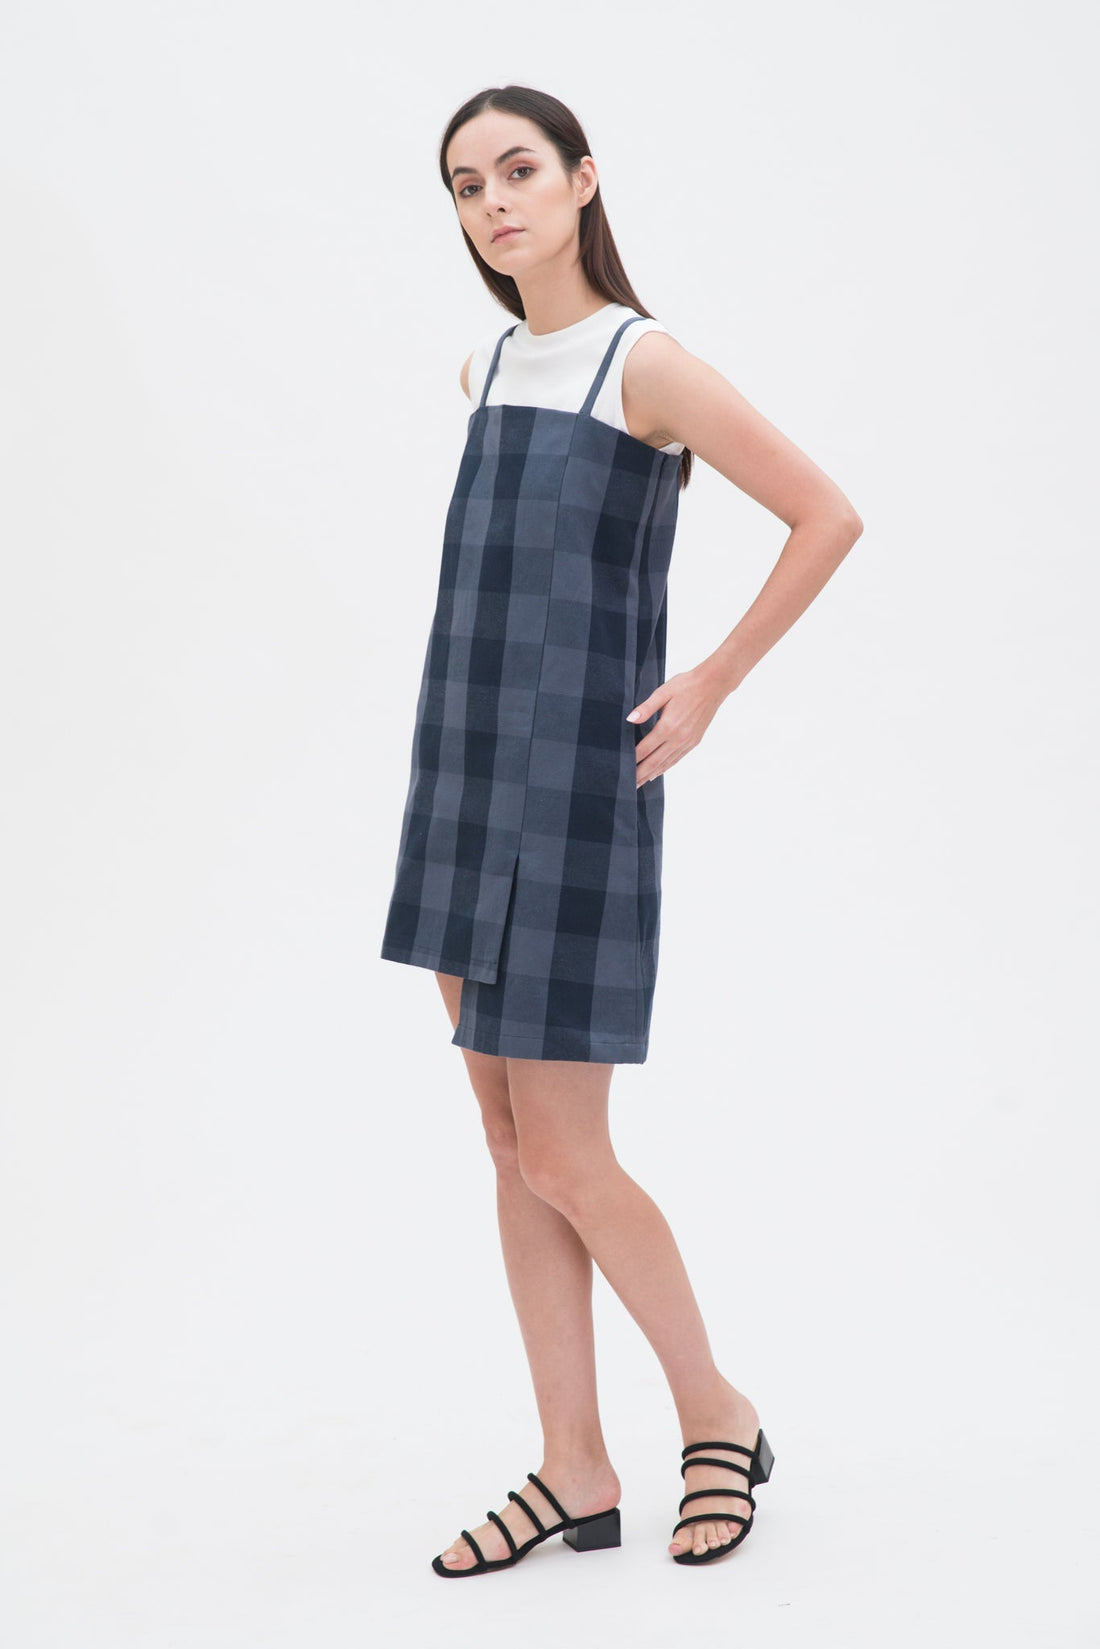 A woman with long dark hair is wearing a navy check dress with a white top underneath and  black sandals